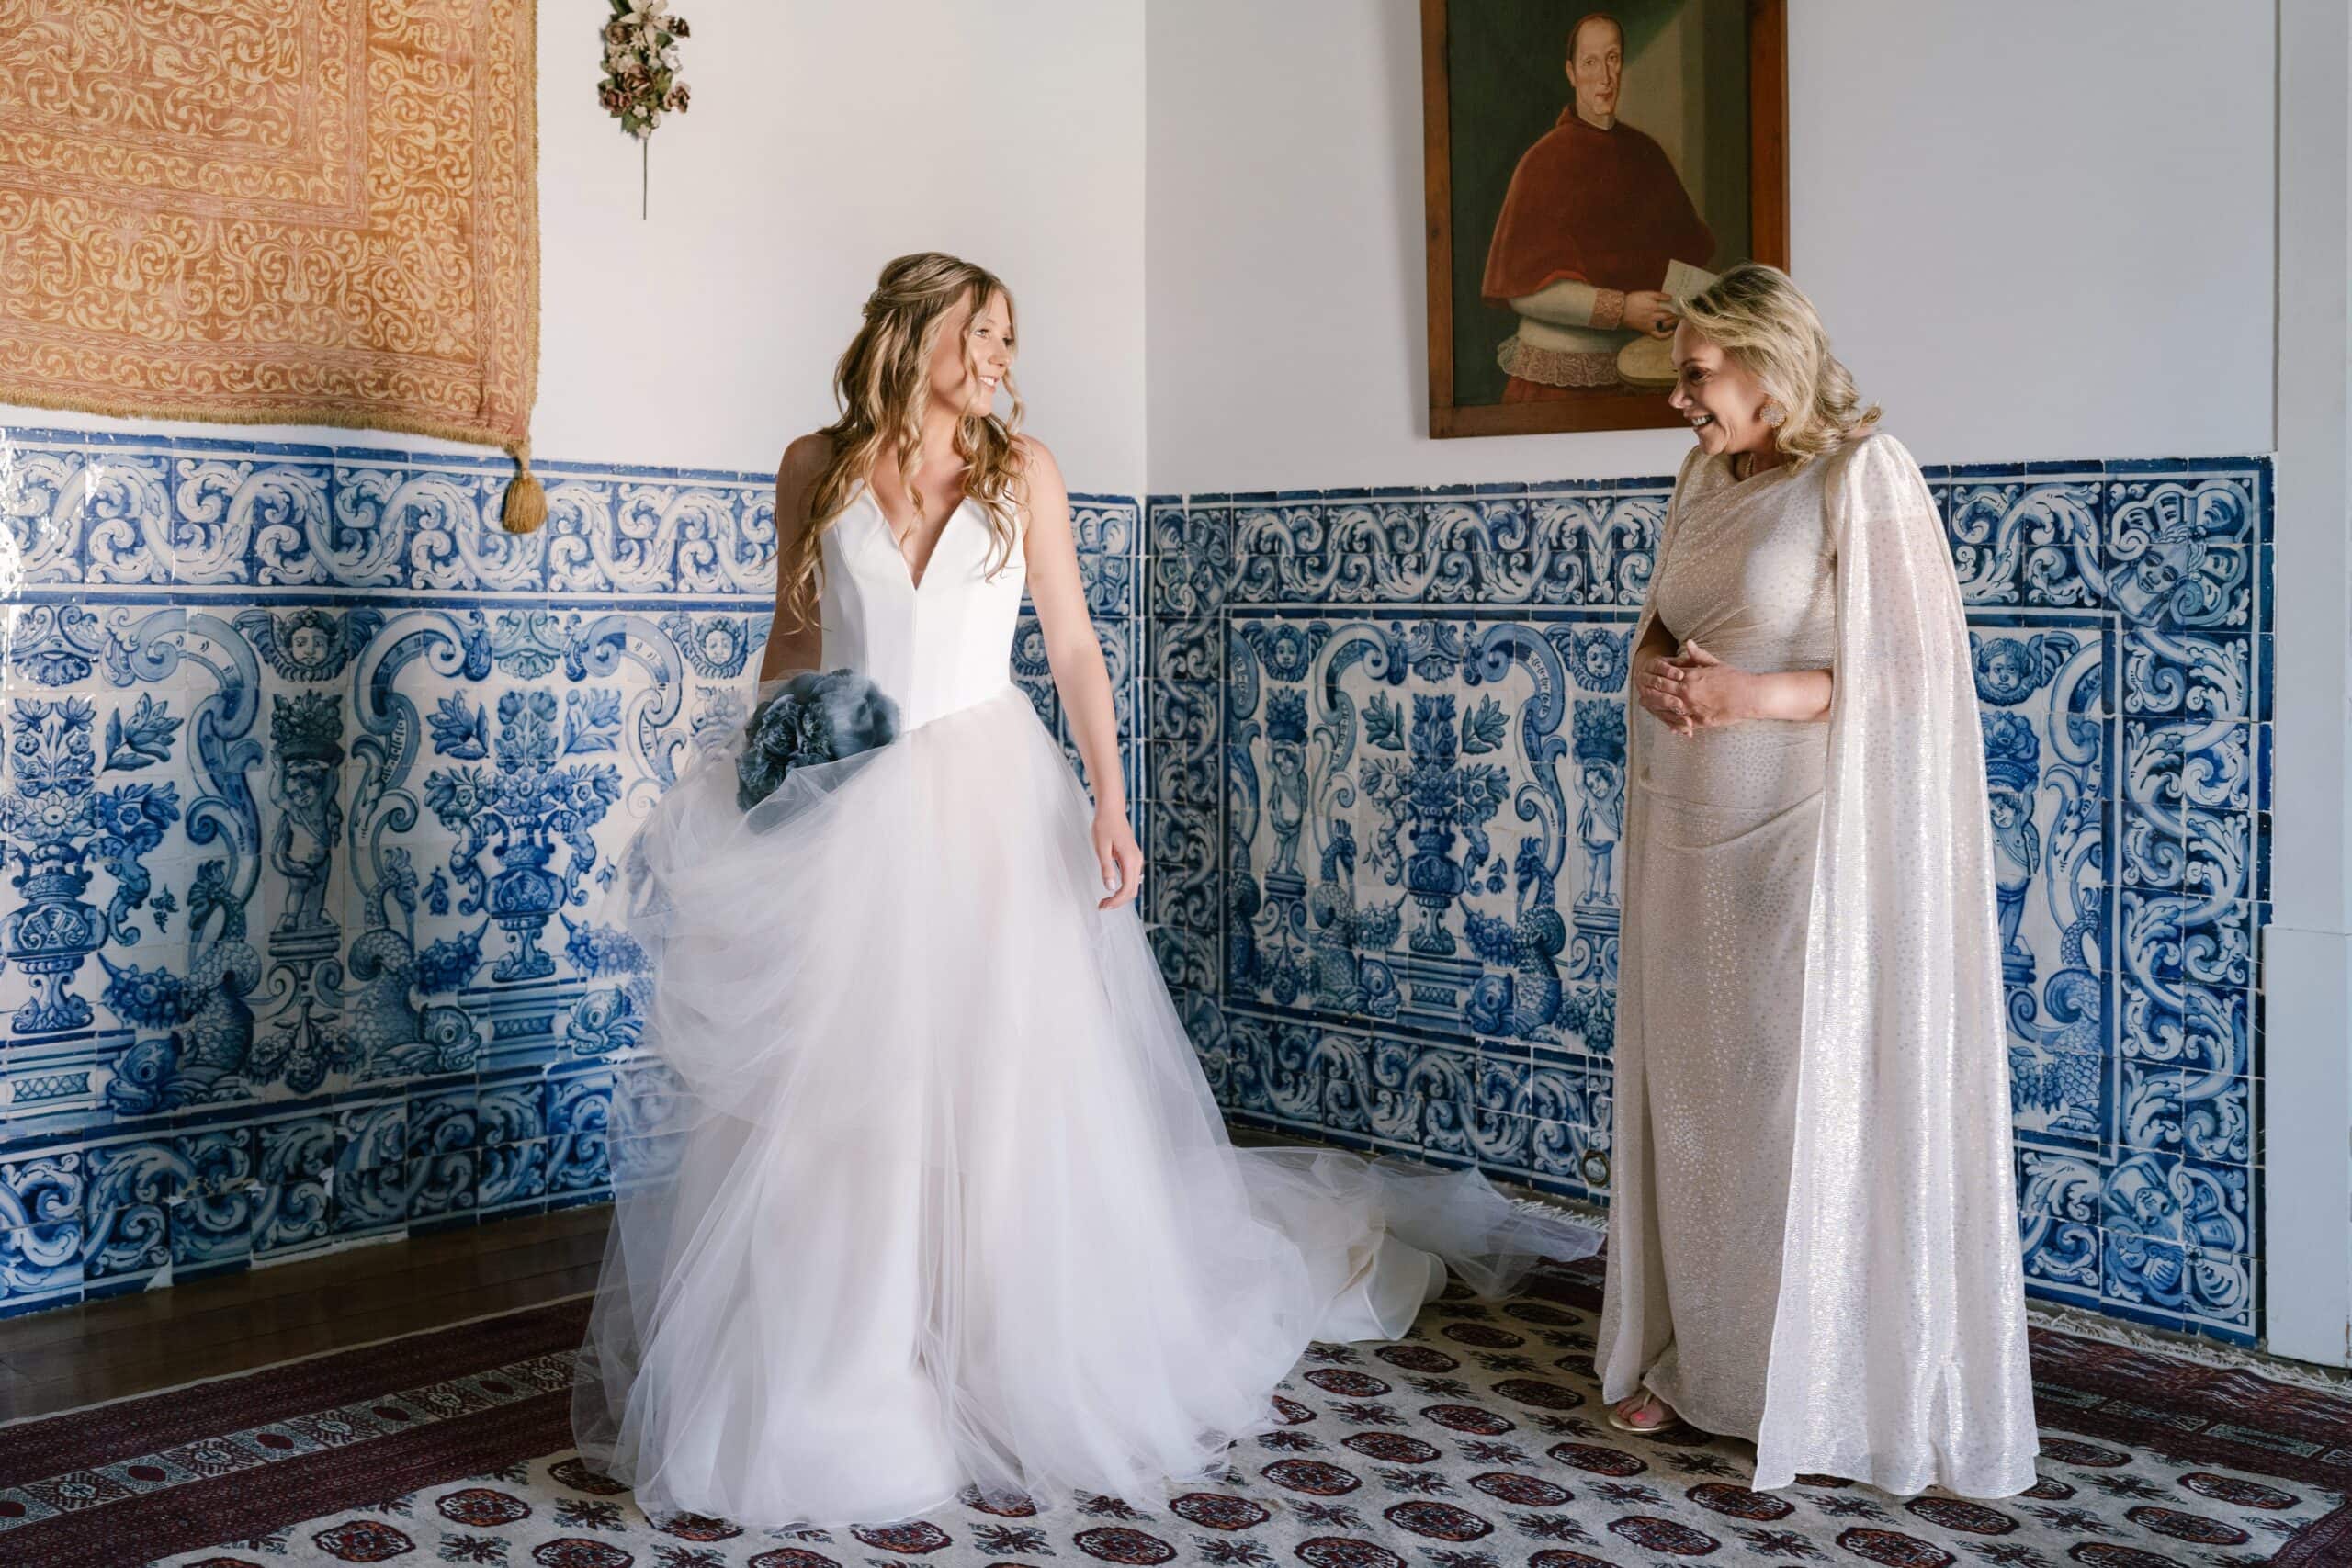 Bride in a flowing white gown sharing a heartfelt First Look with her mother in a glittering gold dress, in the traditional azulejo-tiled room of Palacio de Correio-Mor in Portugal